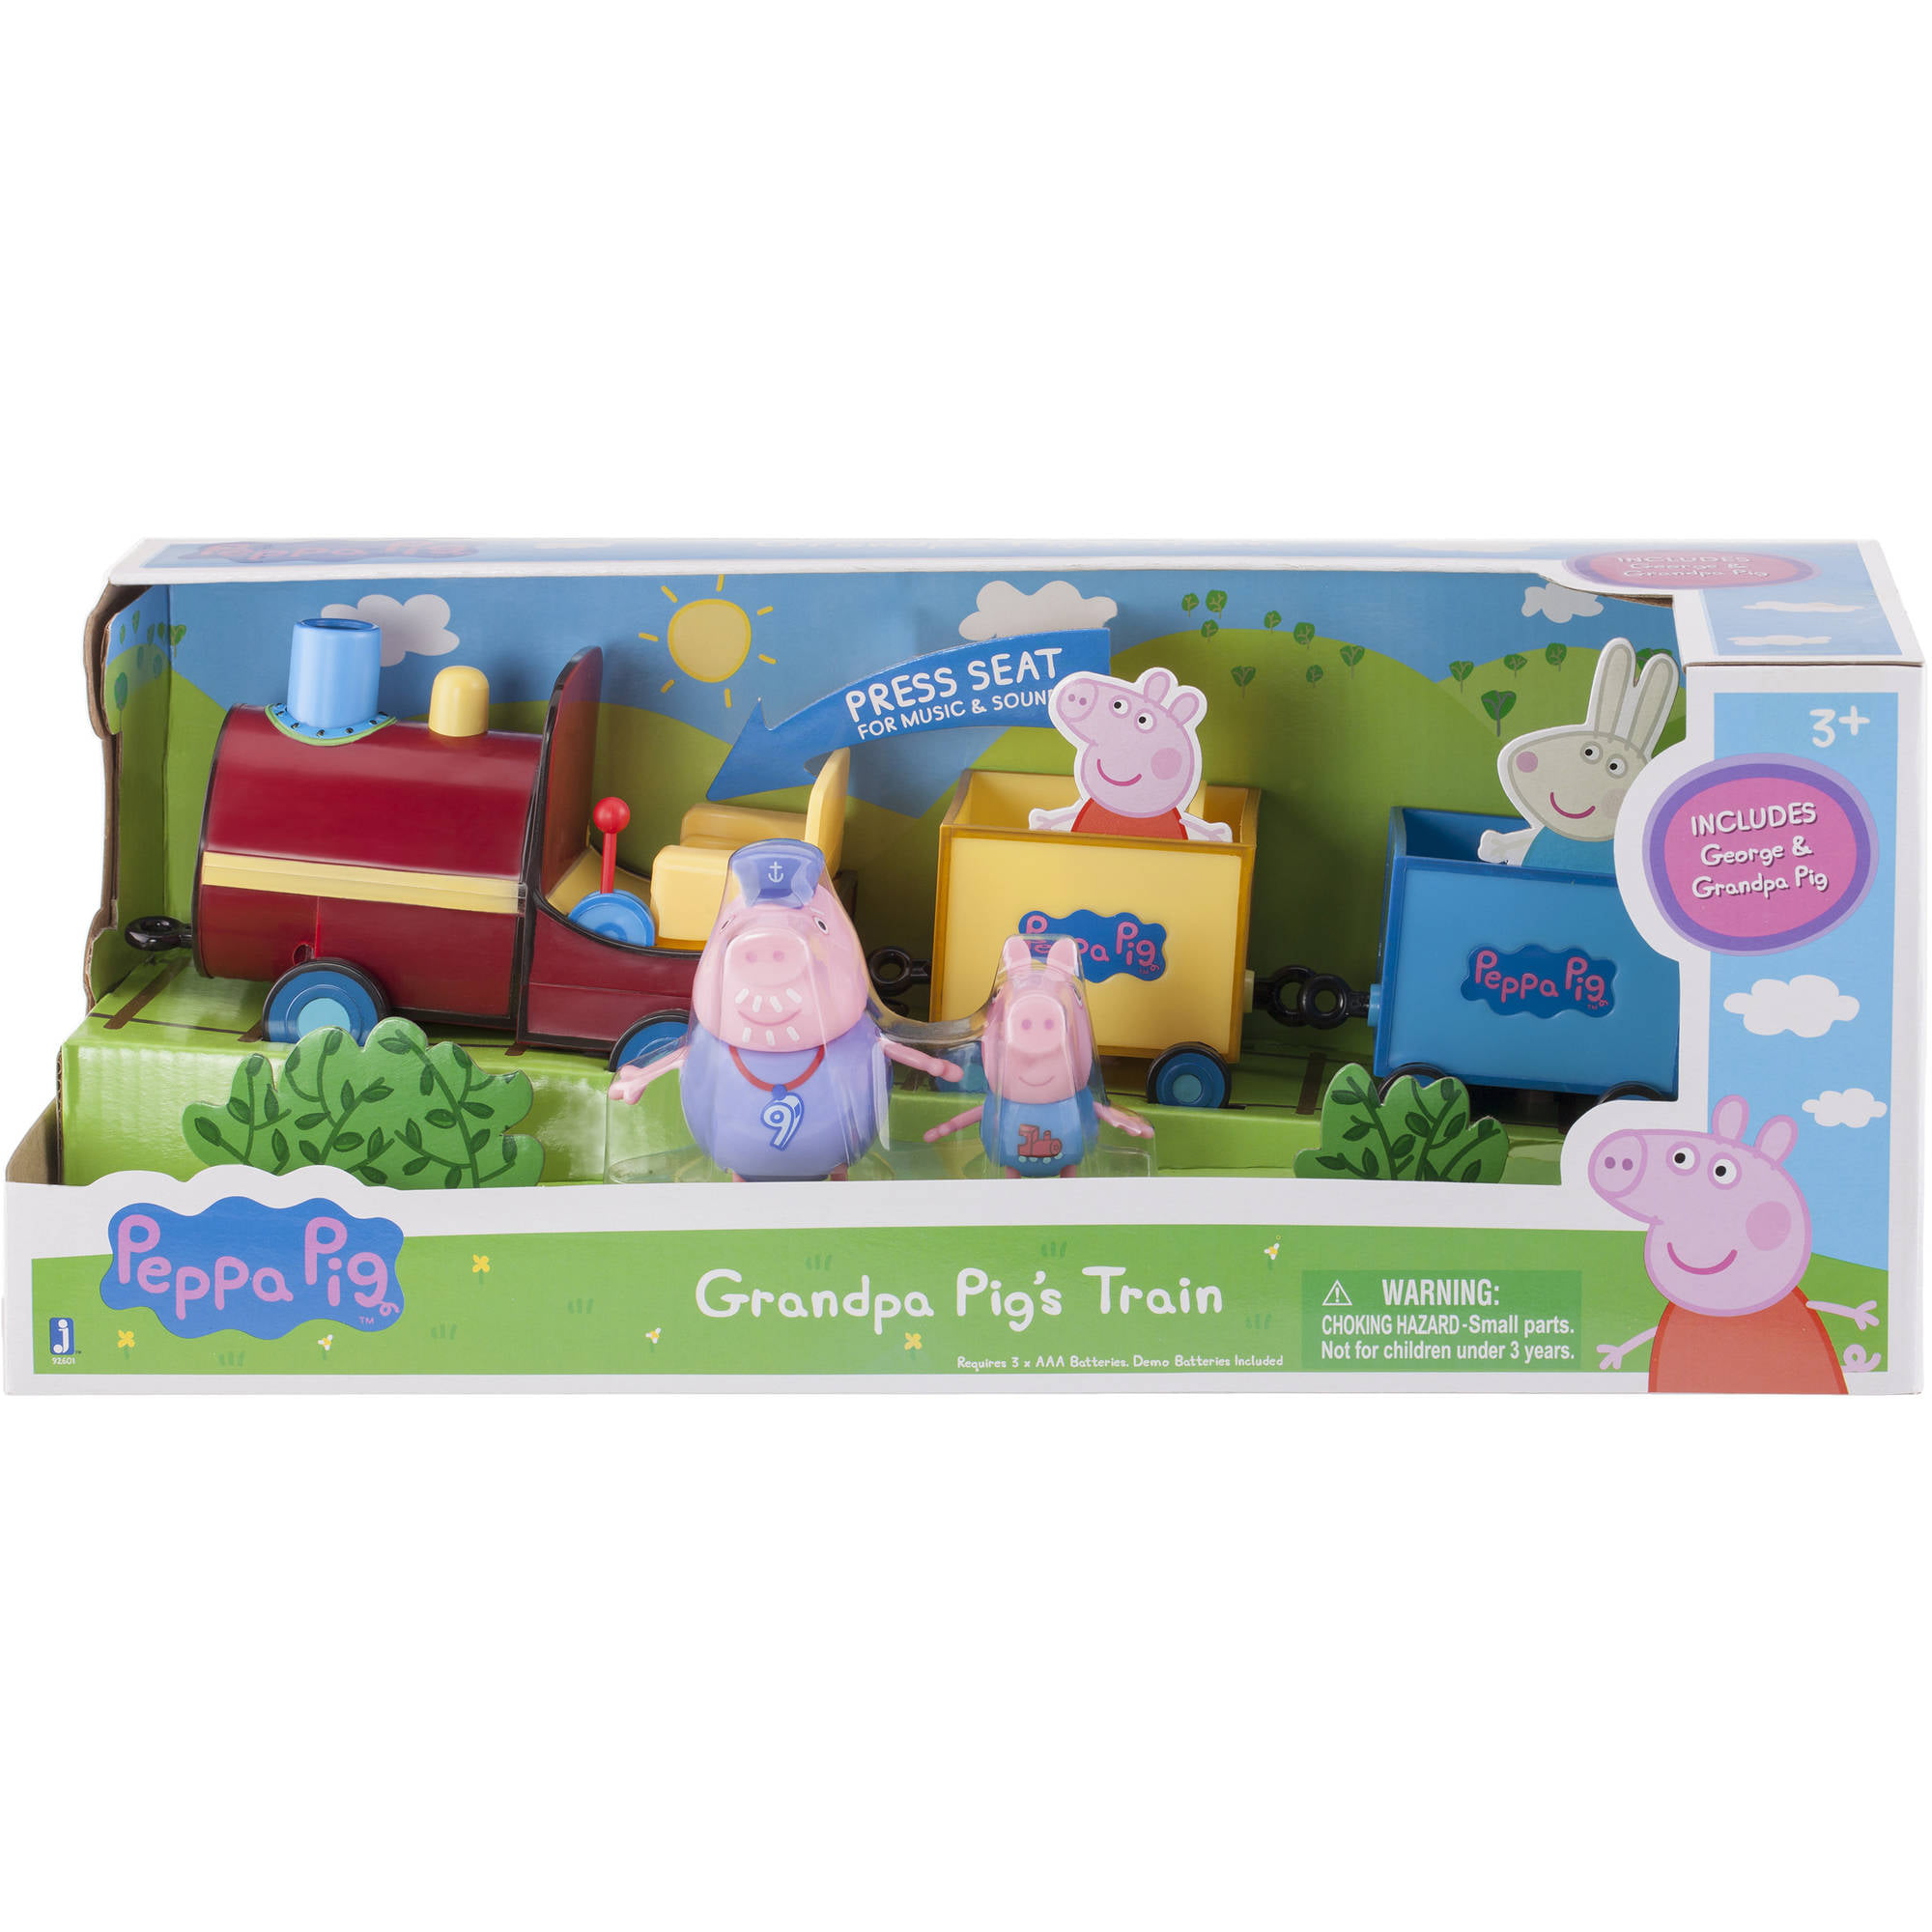 New Peppa Pig On Grandpa Pig's Train With Sound and Figures